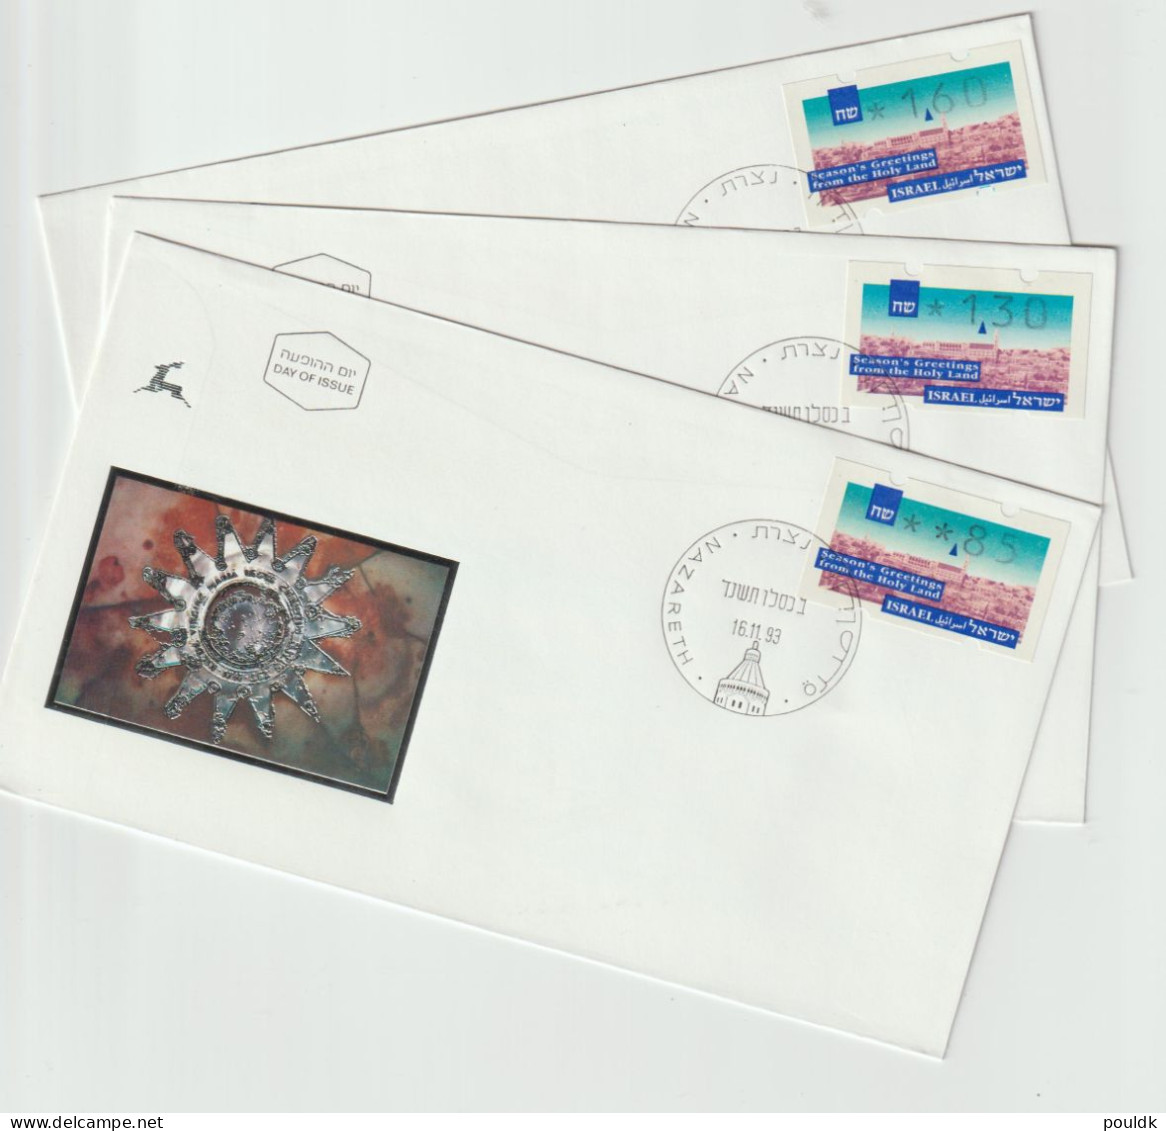 Israel 1993 ATM Christmas - Three FDC From Nazareth. Postal Weight 0,04 Kg. Please Read Sales Conditions Under Image Of - Machine Labels [ATM]